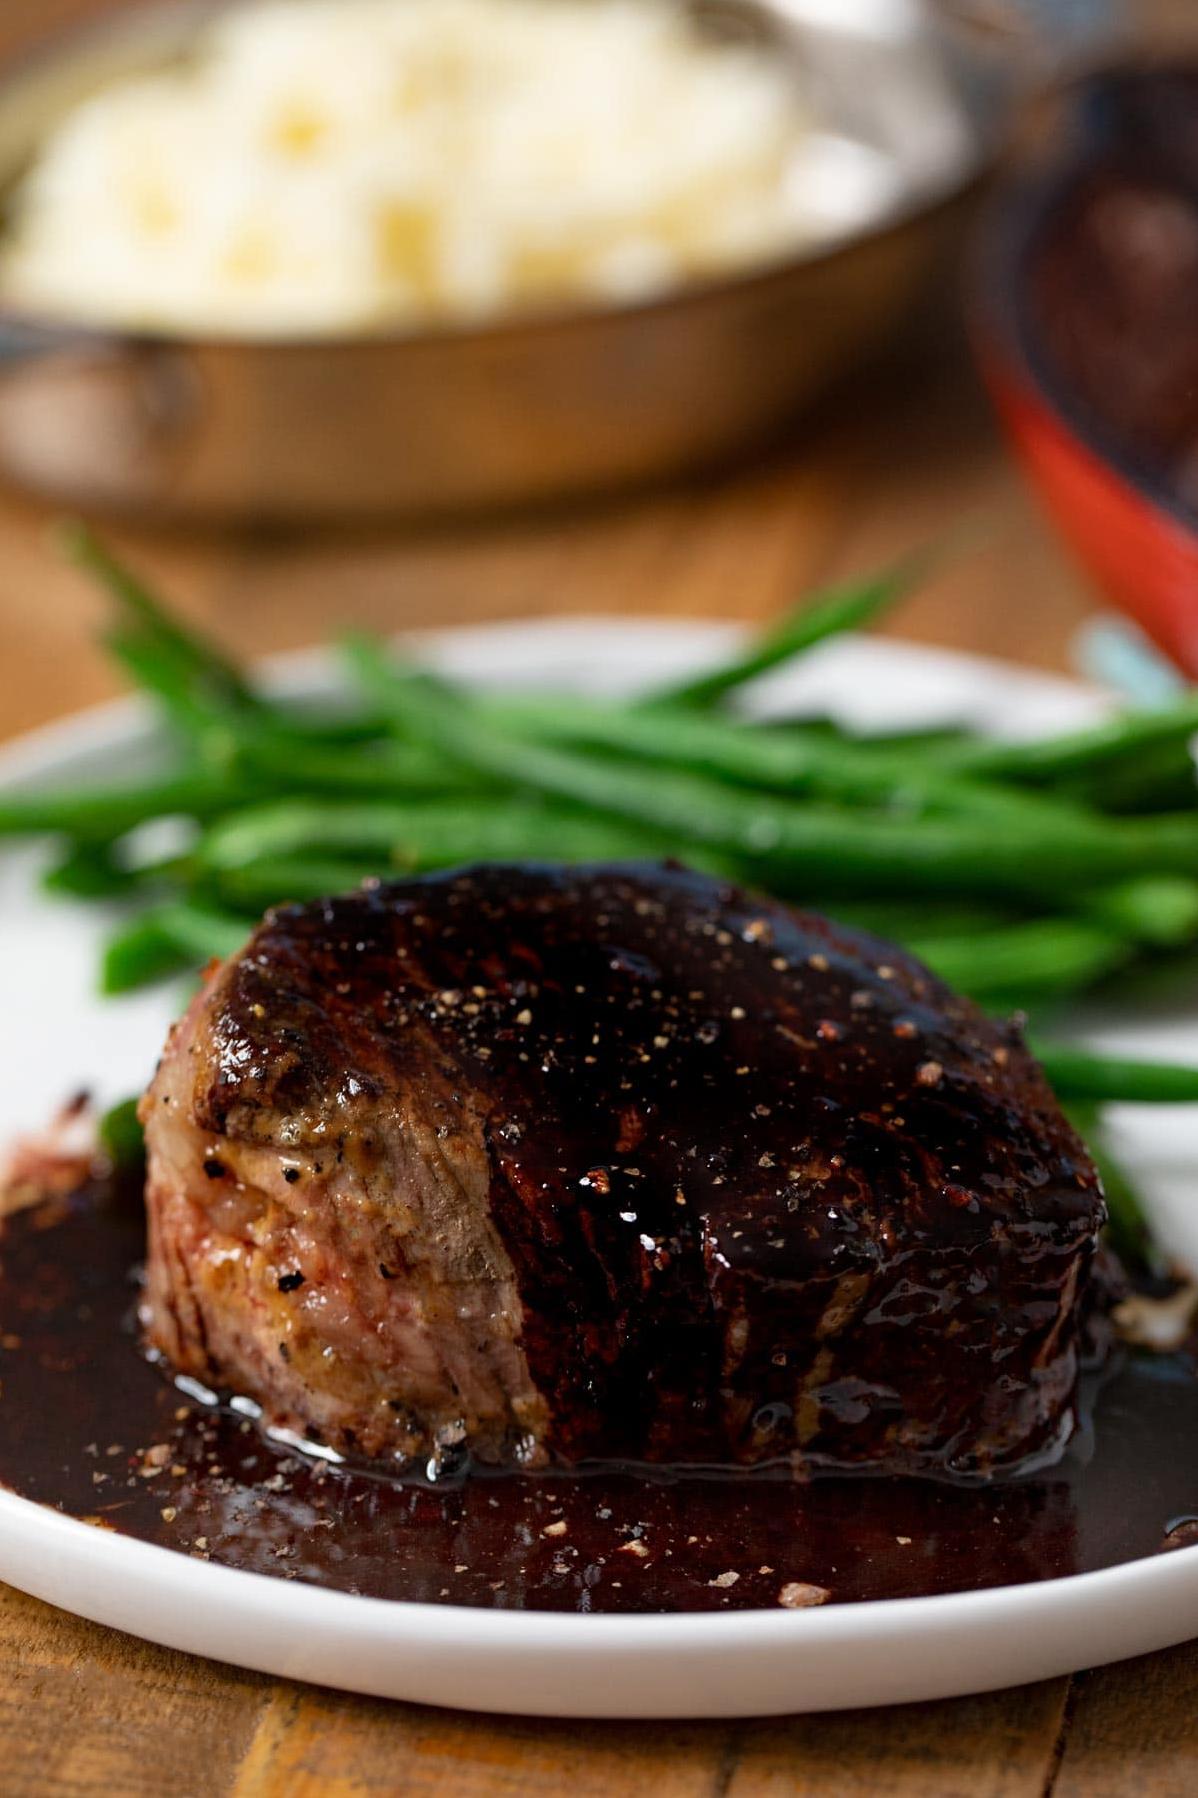  The combination of the tender beef and rich wine sauce will make your taste buds dance.